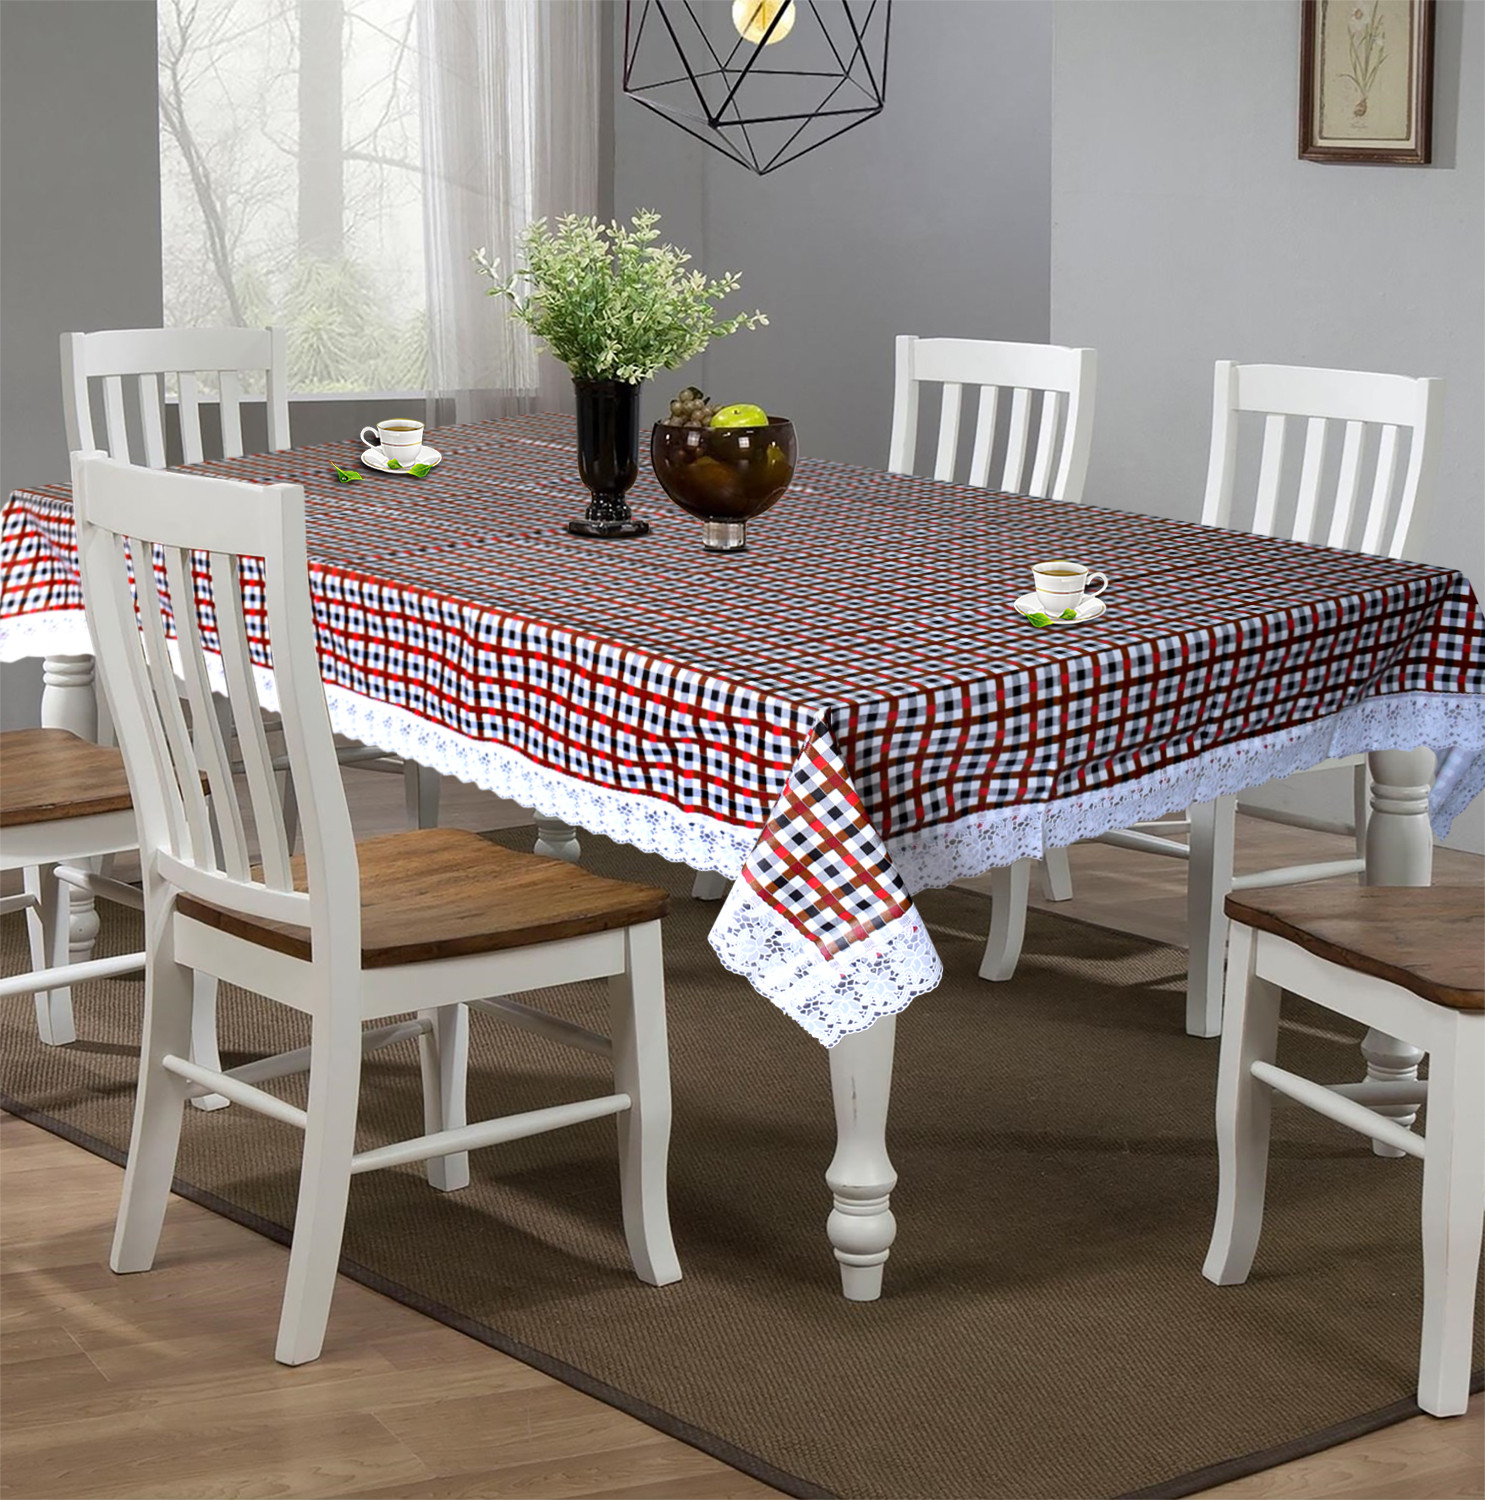 Kuber Industries Check Printed PVC 6 Seater Dinning Table Cover, Protector With White Lace Border, 60